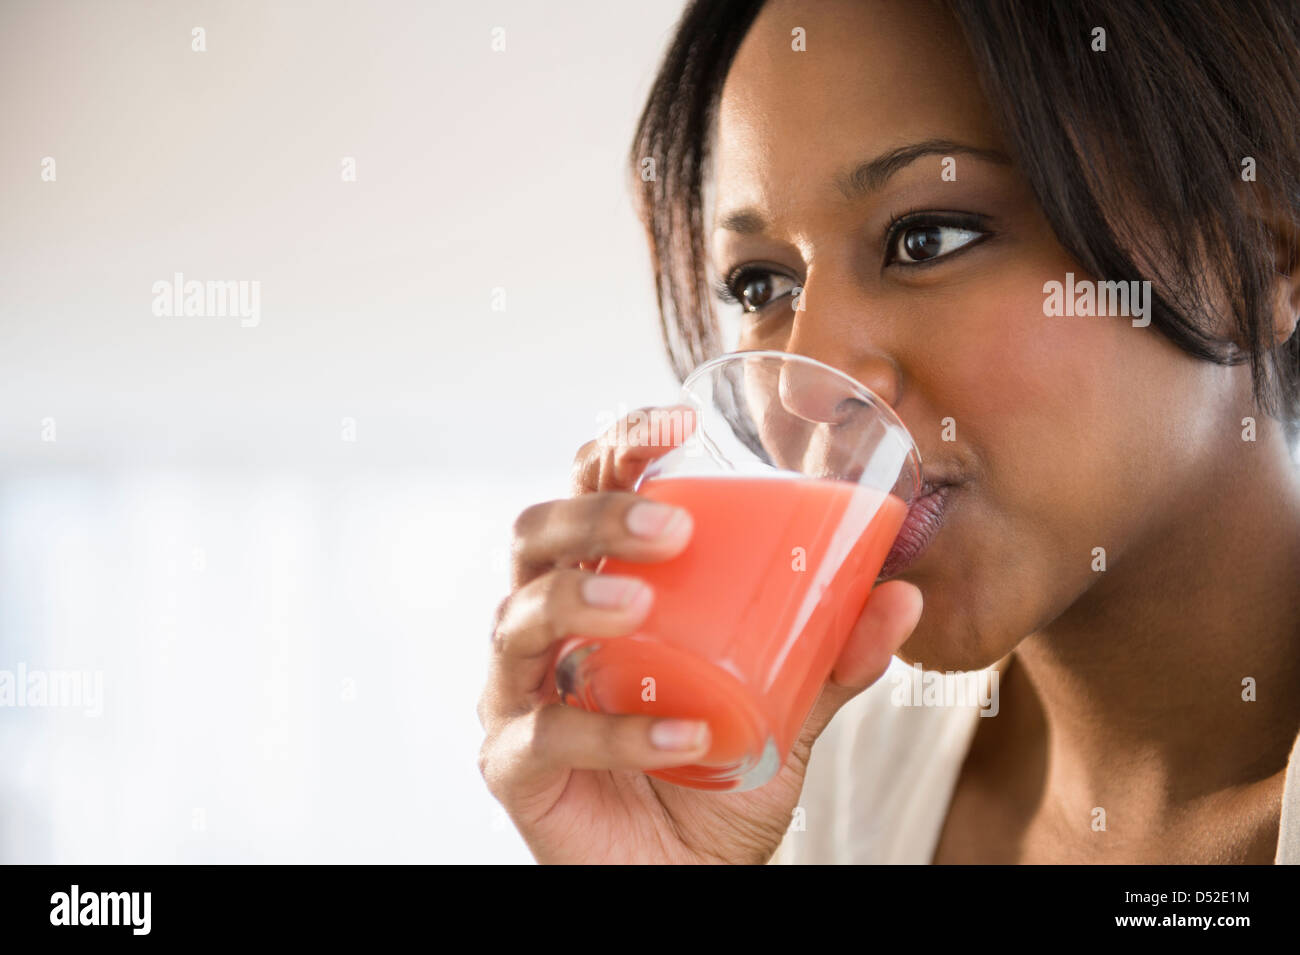 African American Woman drinking glass of juice Banque D'Images